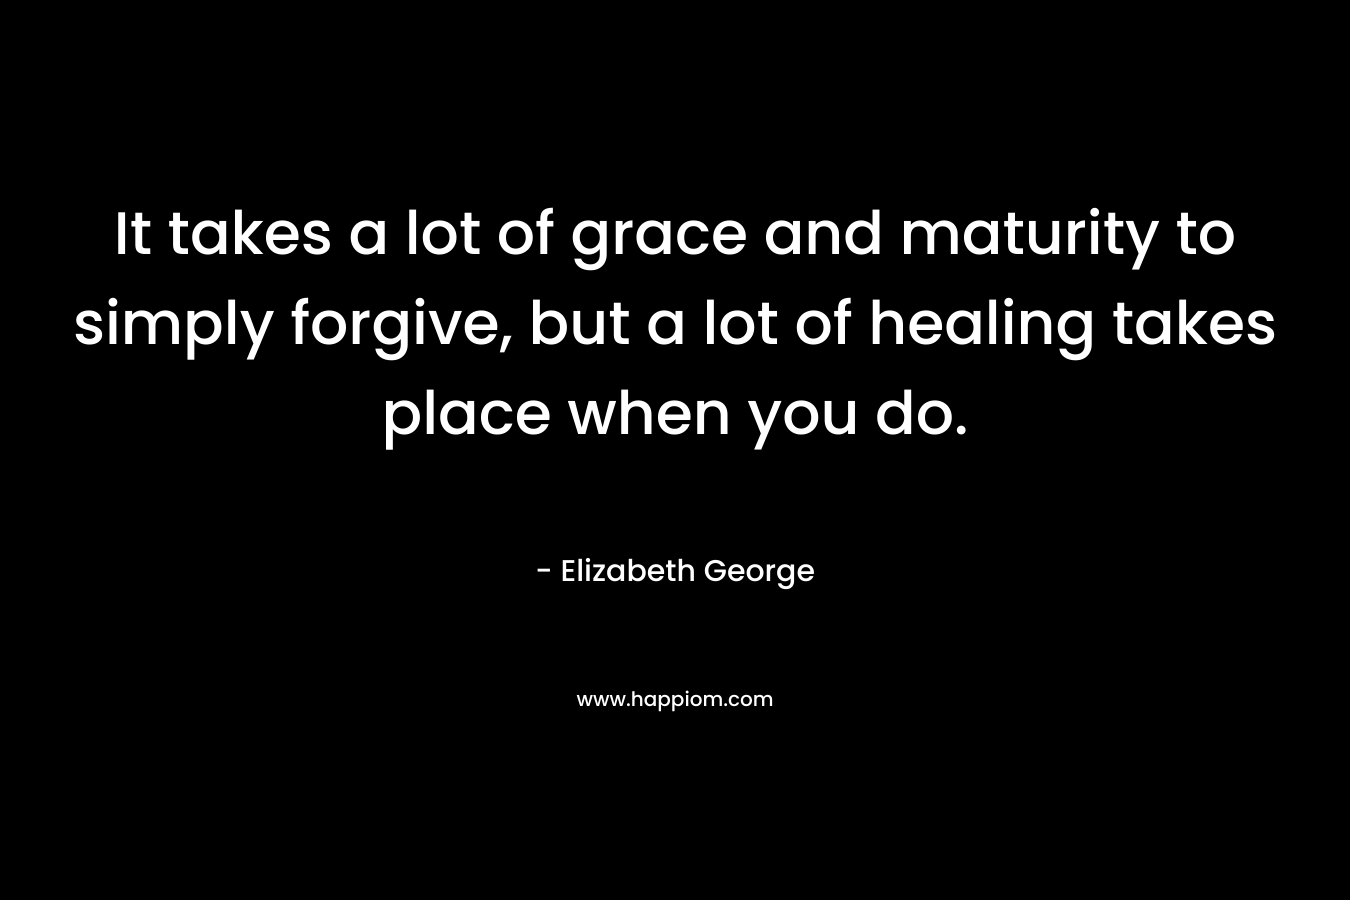 It takes a lot of grace and maturity to simply forgive, but a lot of healing takes place when you do.